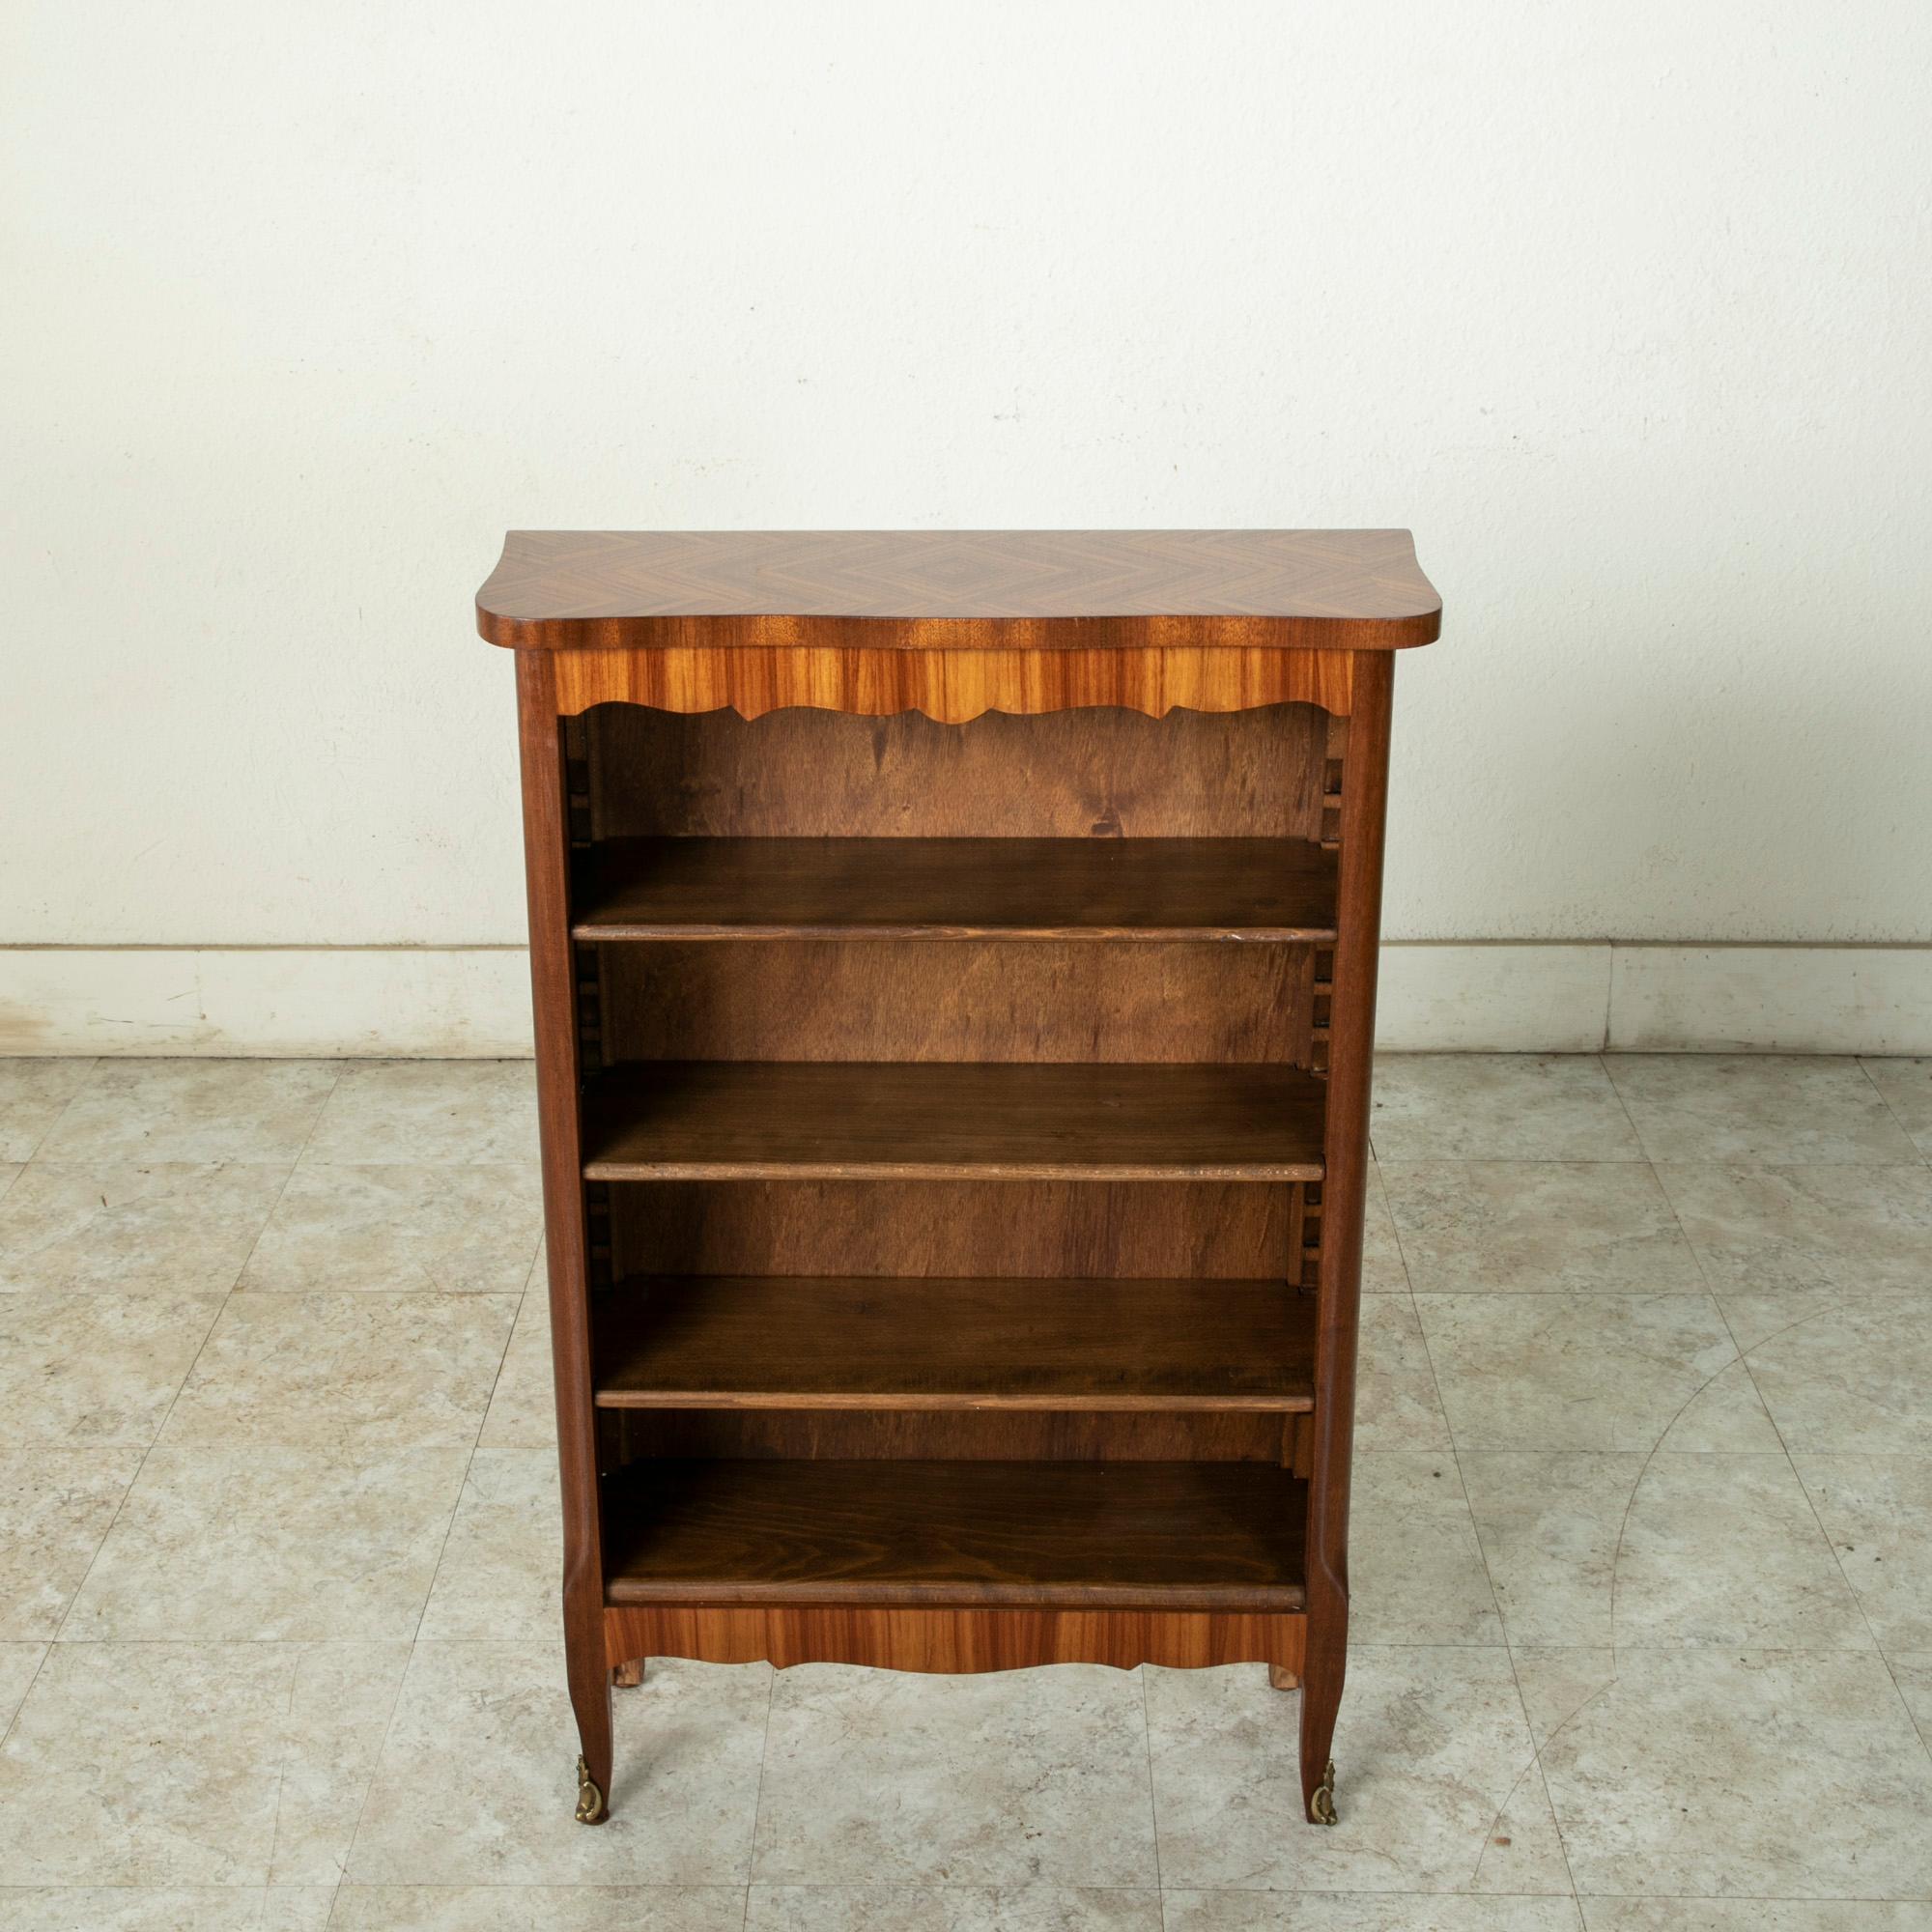 Standing at only 38 inches in height, this small scale early 20th century French Louis XV-Louis XVI transition style bookshelf features an exquisite inlaid rosewood exterior. Its three shelves are adjustable to accommodate different heights. The